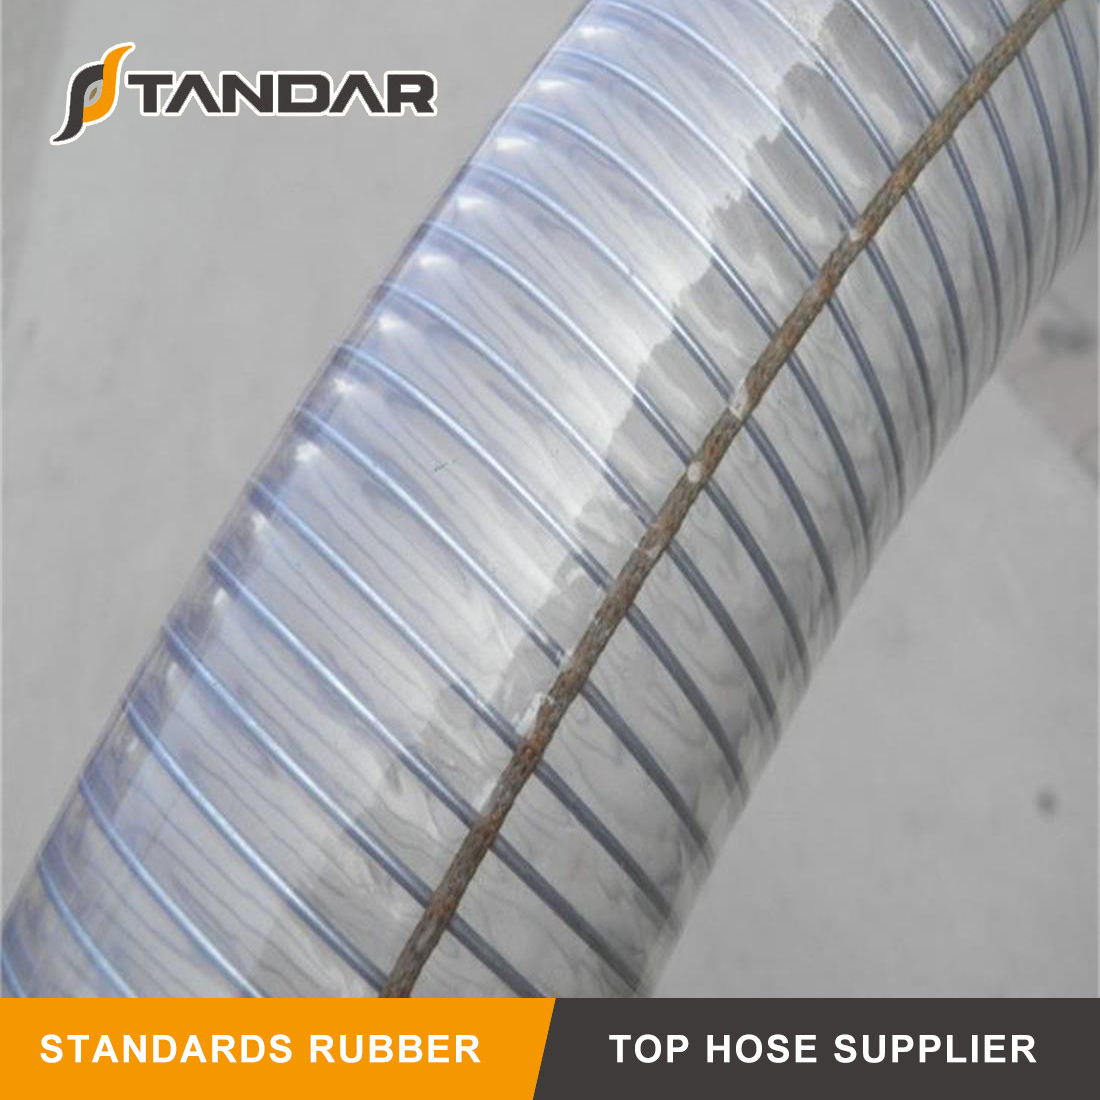 High Pressure Transparent FDA Stainless Steel Wire Reinforced Silicone Hose 